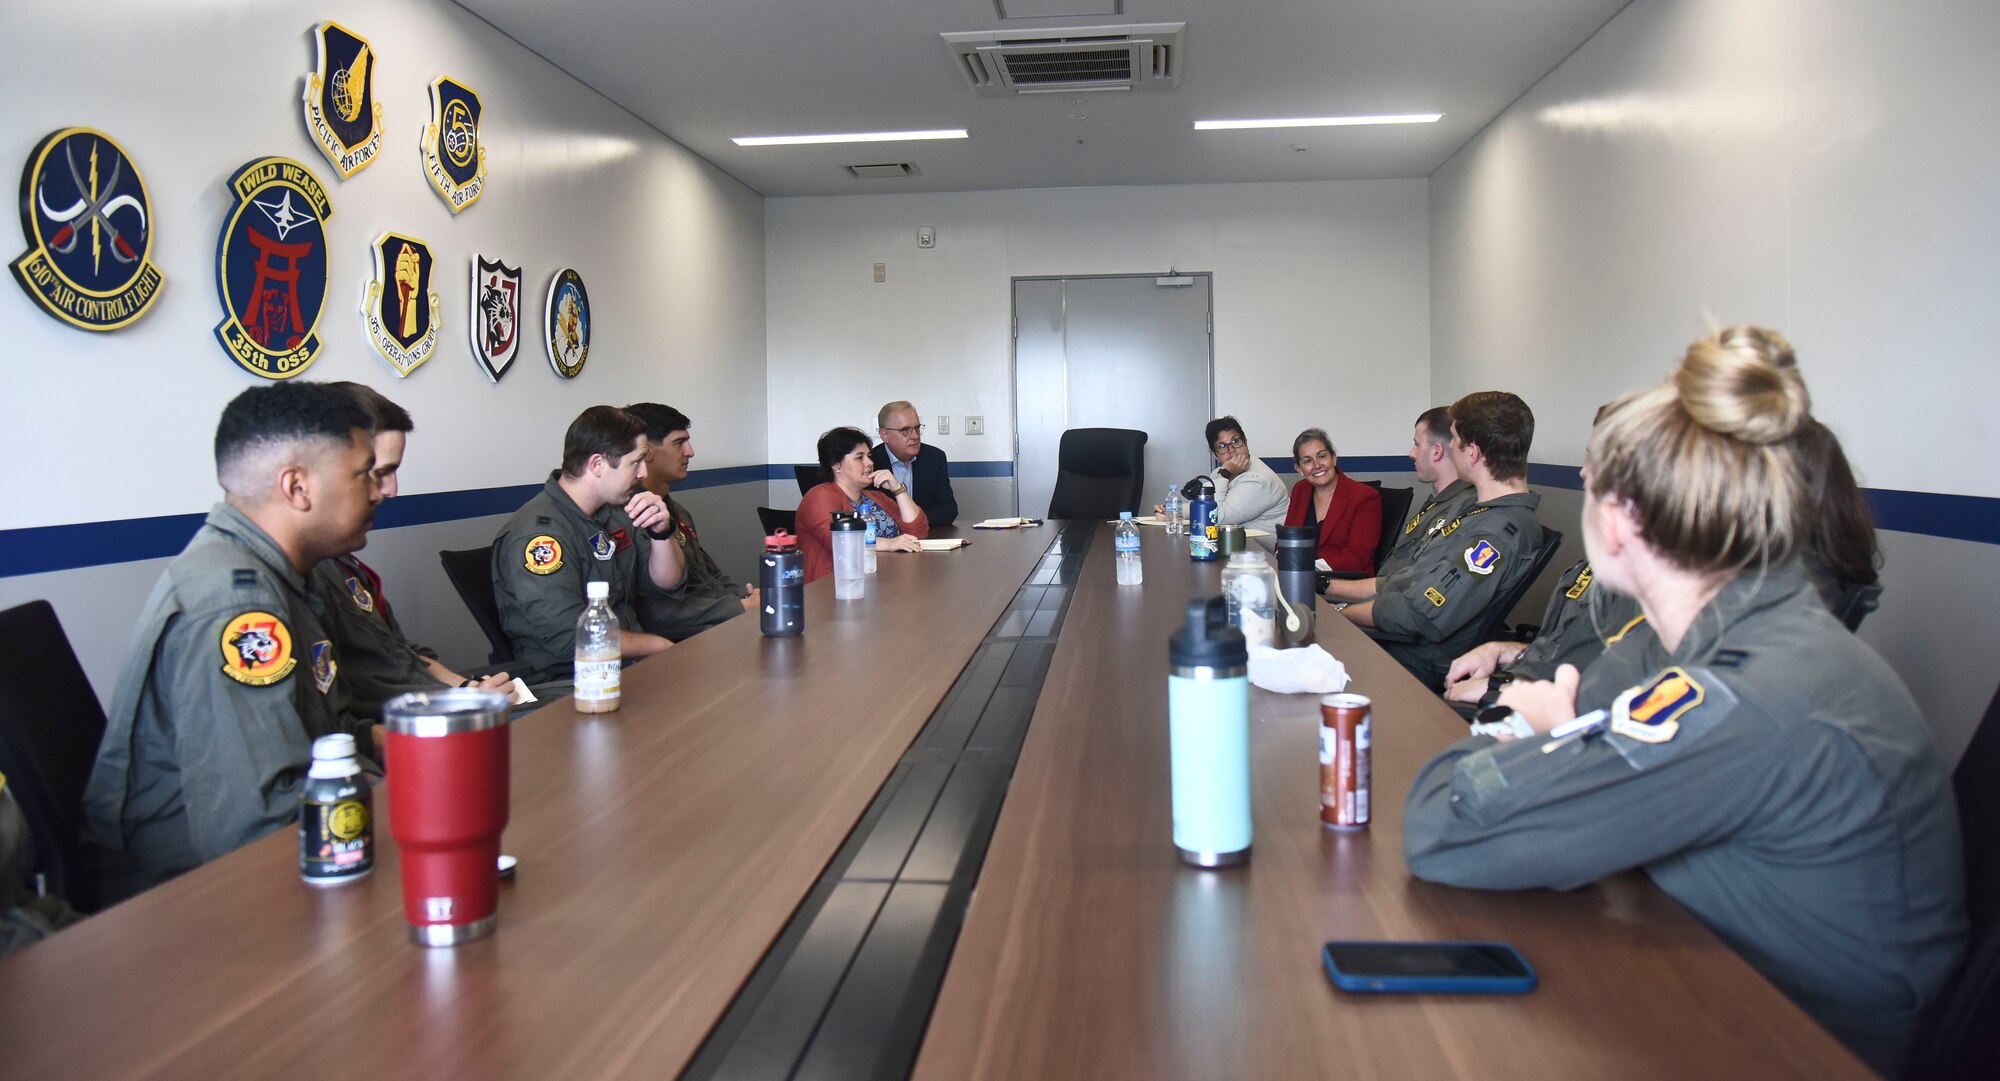 Members of the House Armed Services Committee meet with members of the 35th Operations Group in an aircrew.